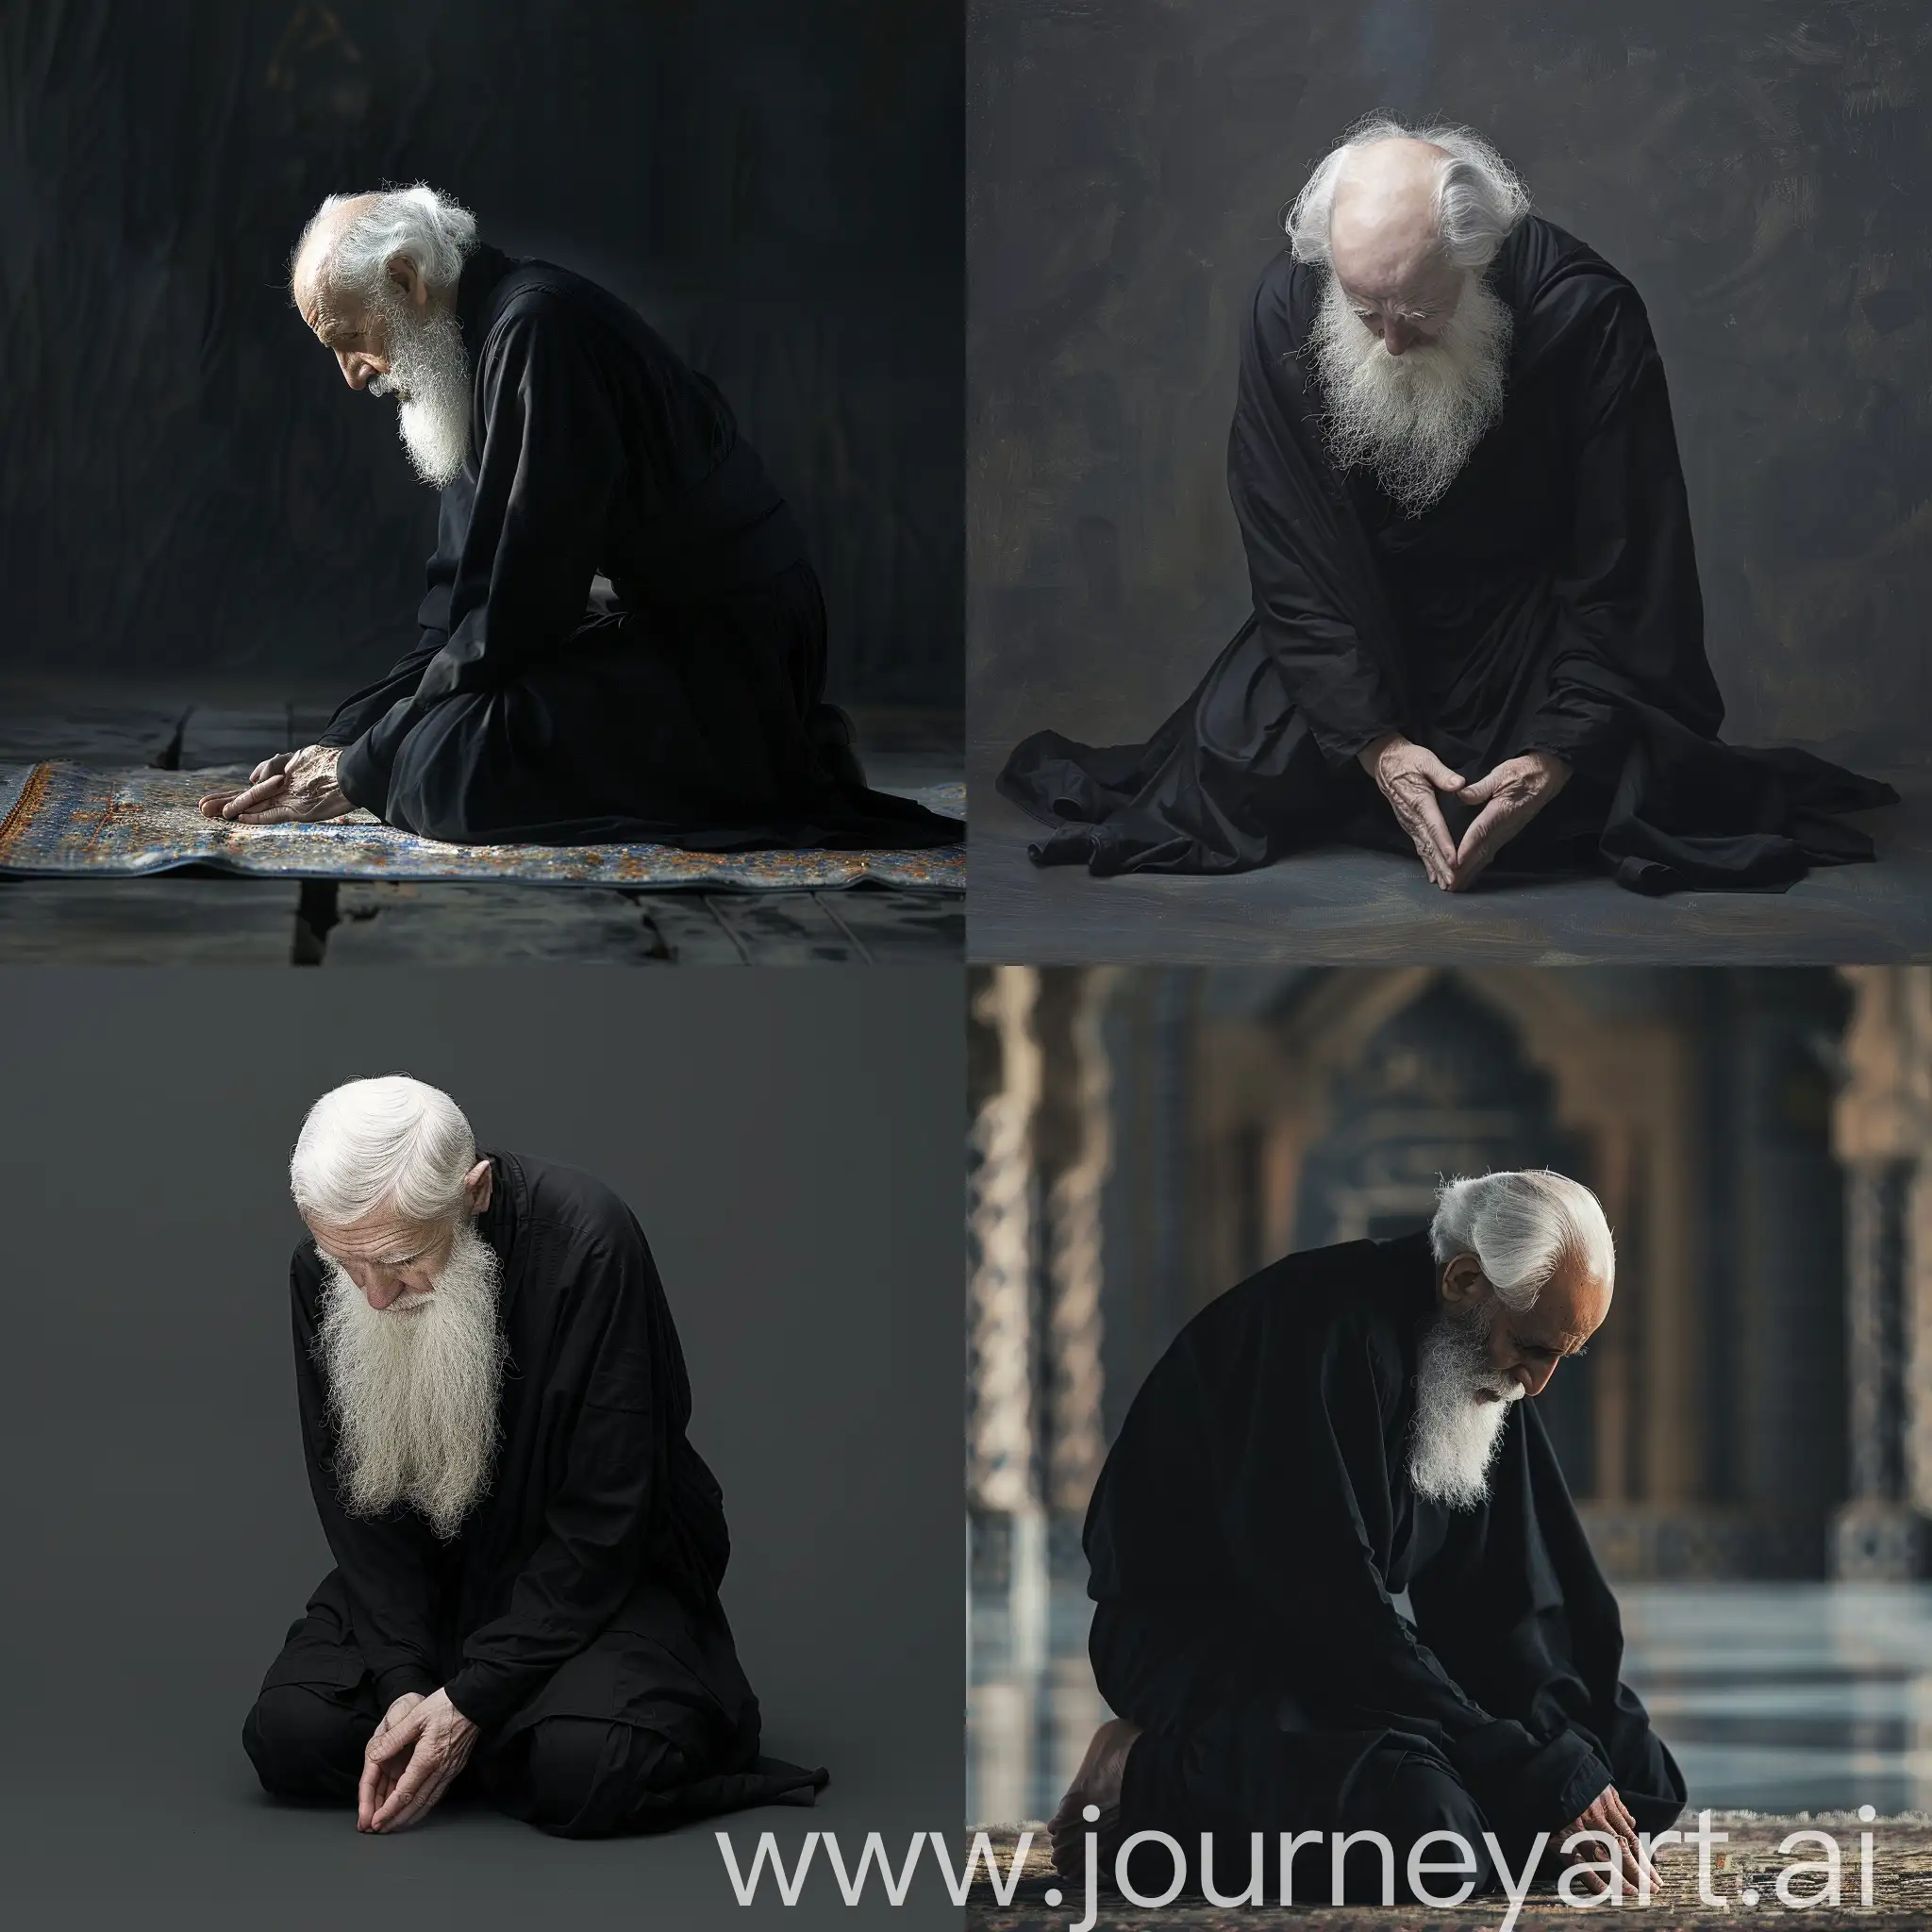 A beautiful image of a monk wearing black with white hair and white beard kneeling down in prayer